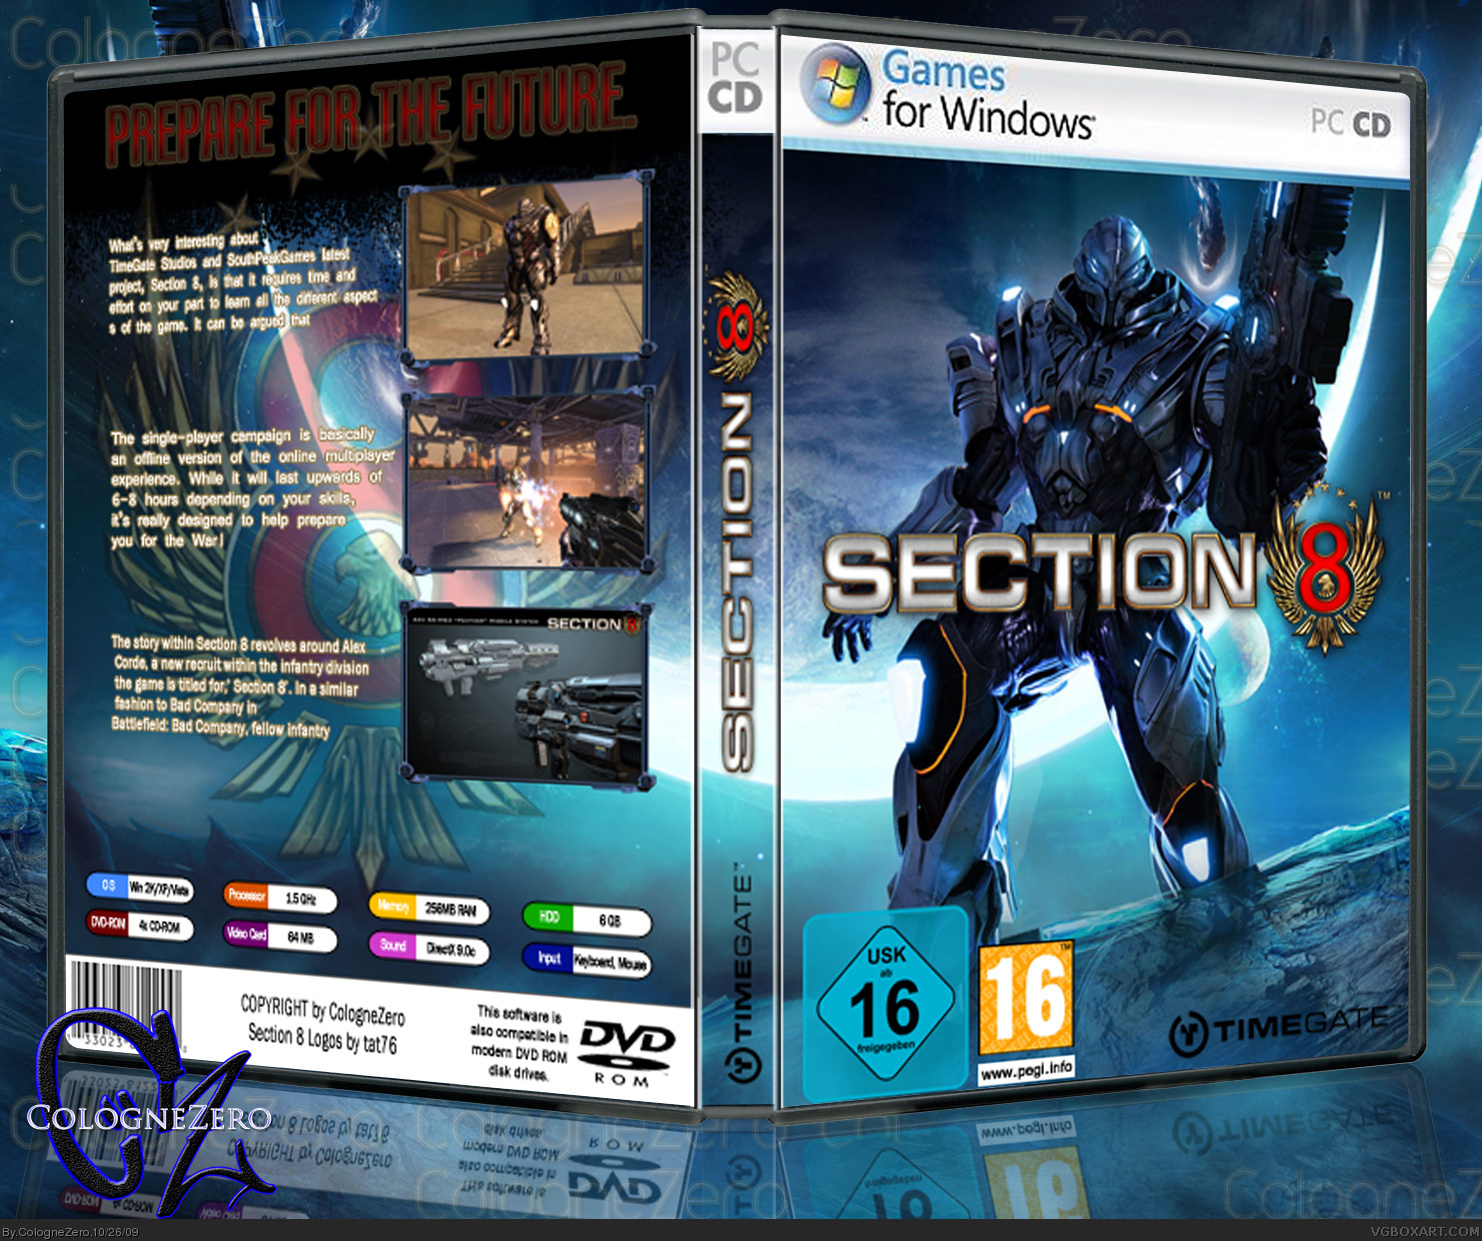 Section 8 box cover